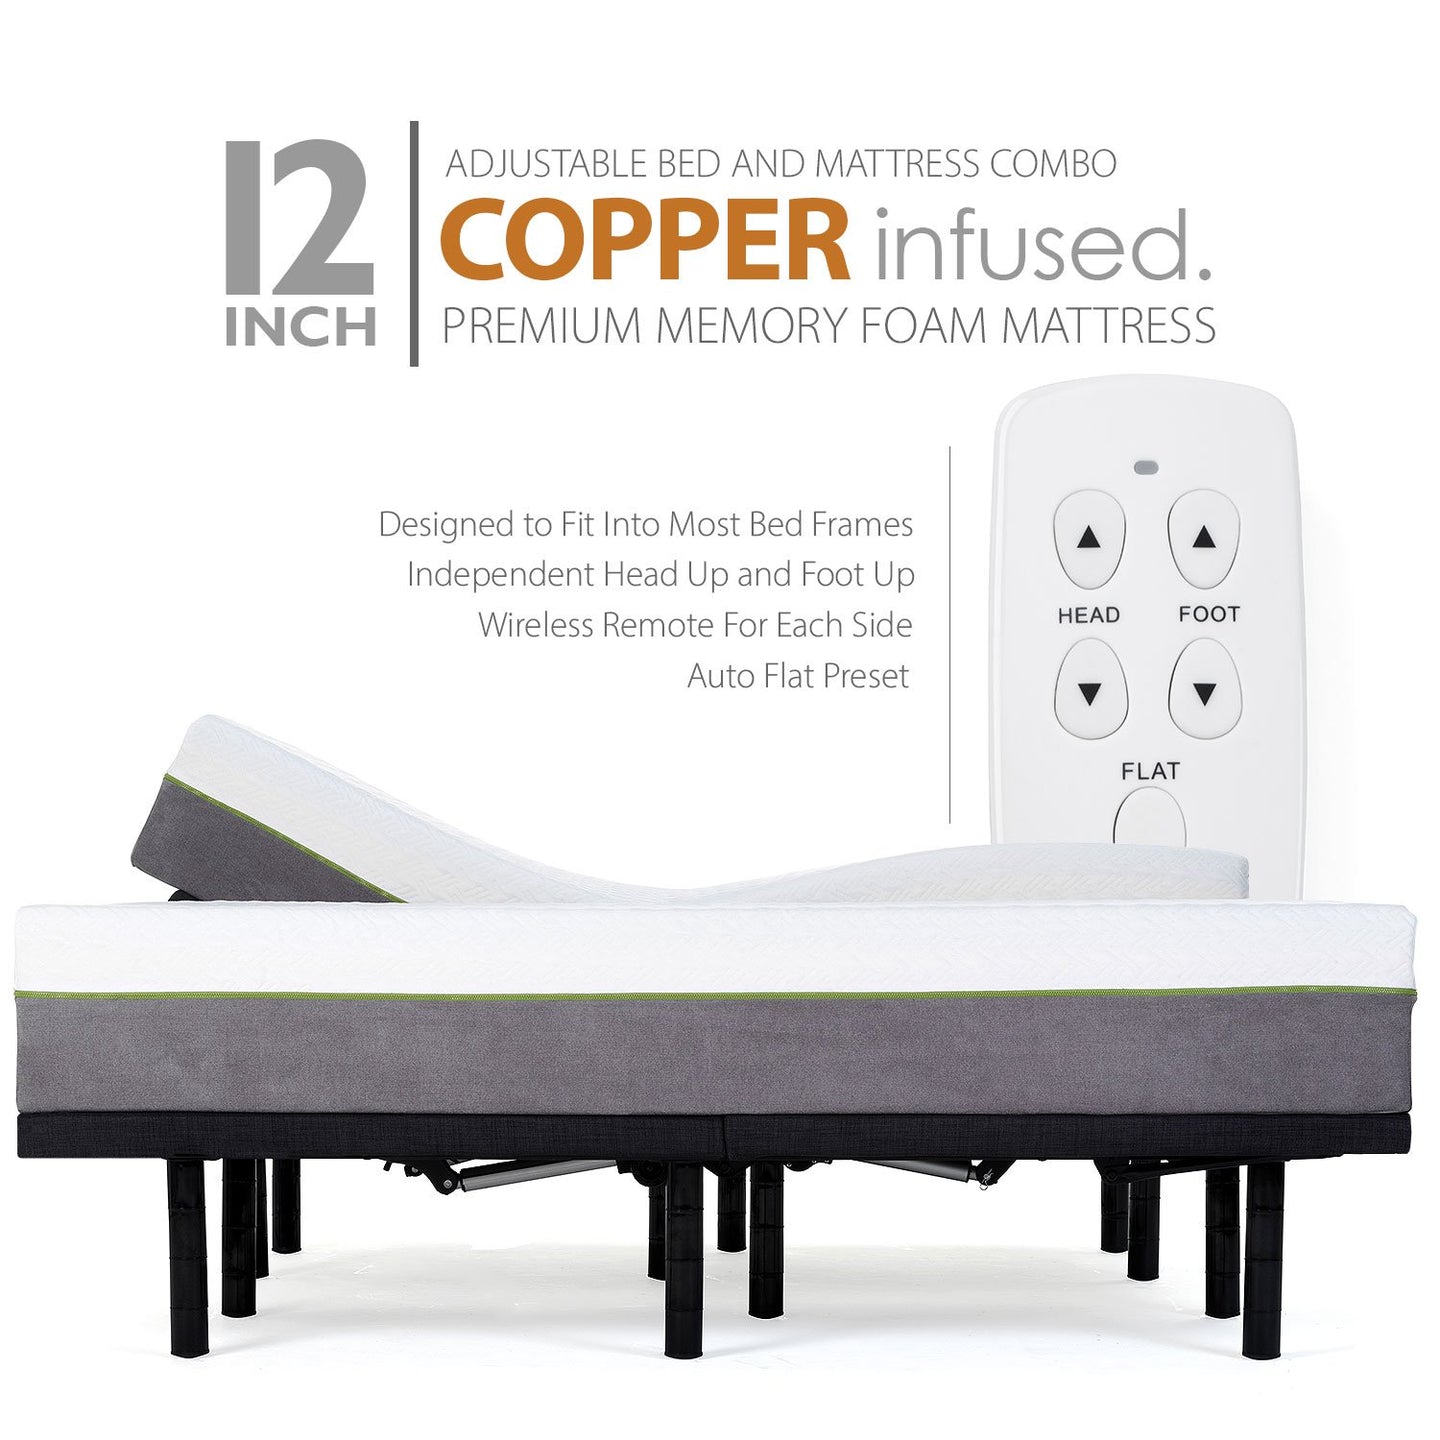 Adjustable Bed Frame and 12 Inch Copper Infused Cool Memory Foam Mattress - Medium Firm